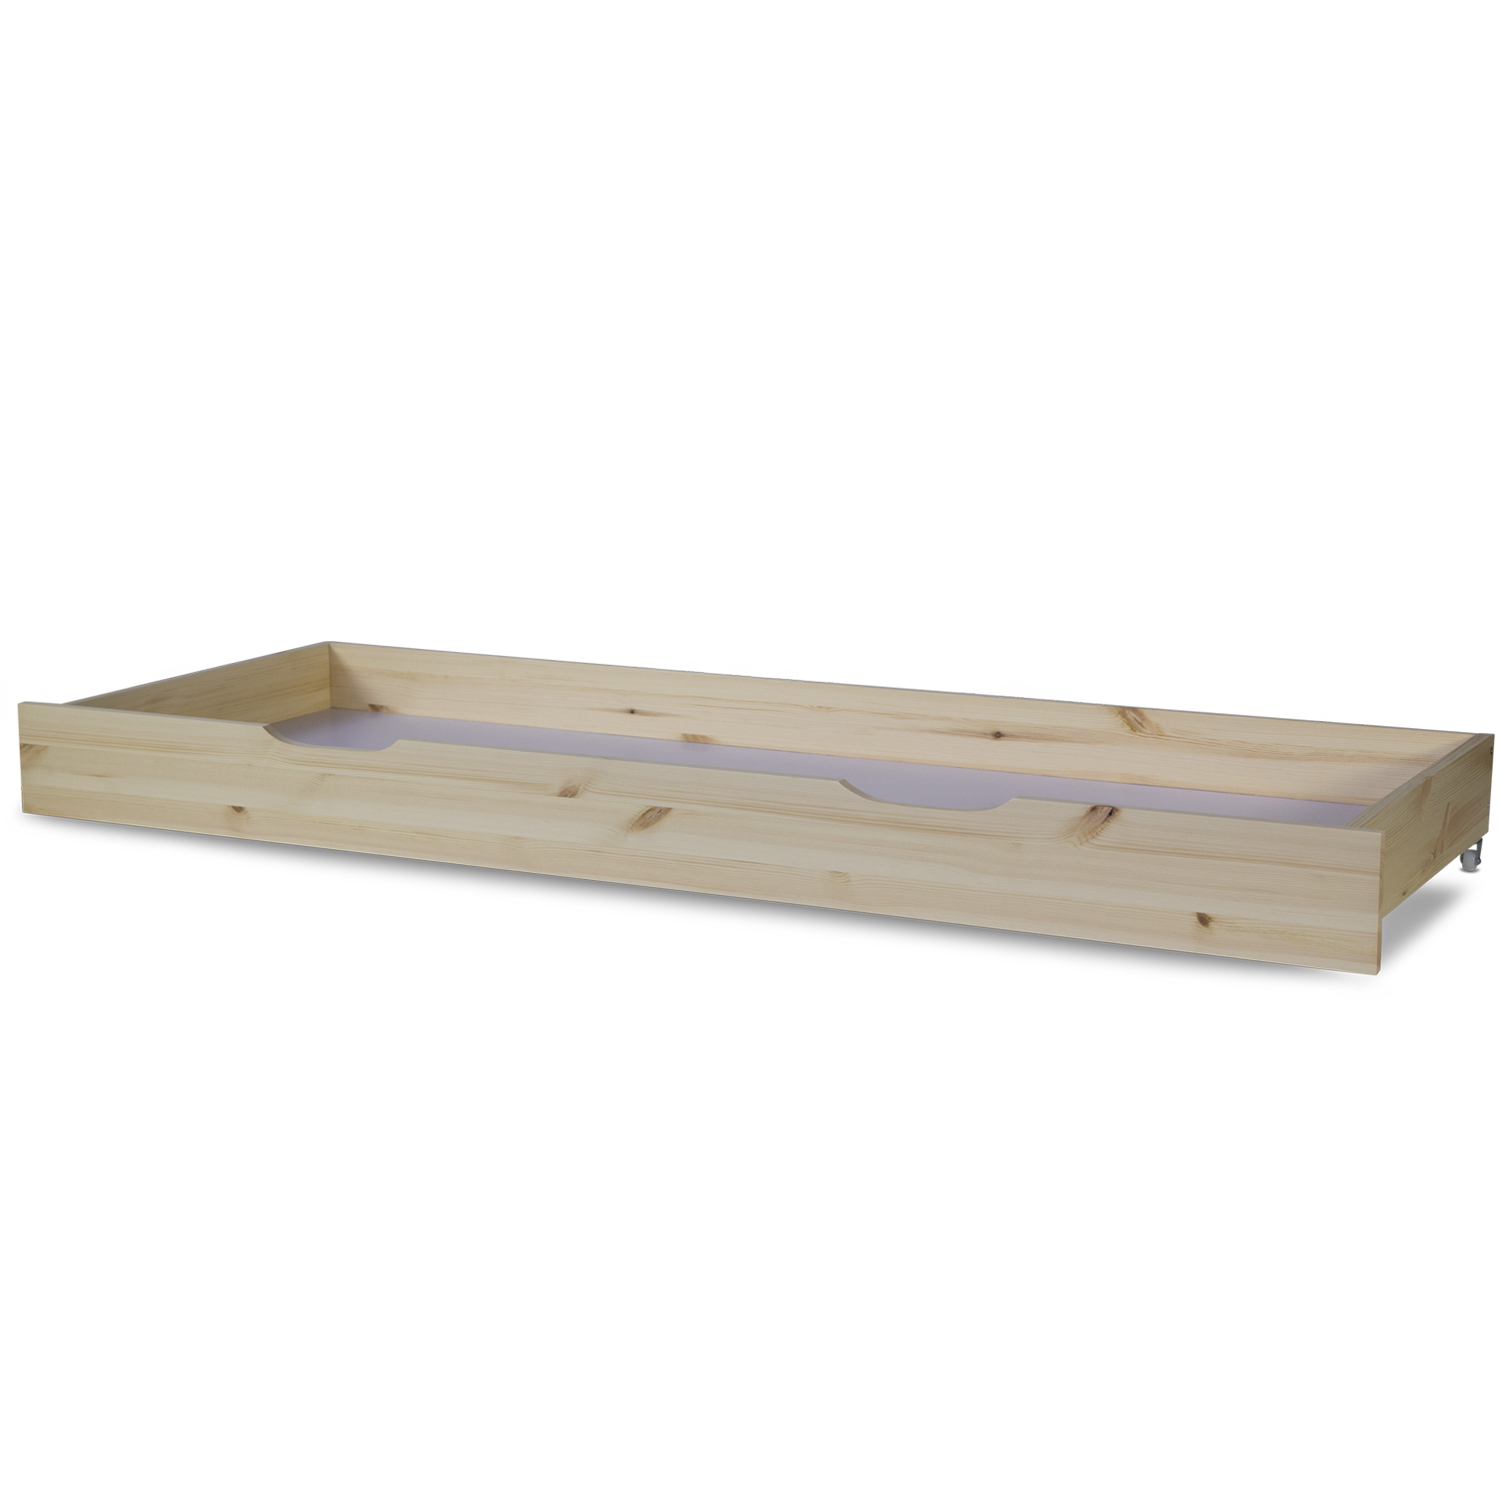 Wooden Bed Drawer Pull-Out Bed Box Storage with Castors Natural